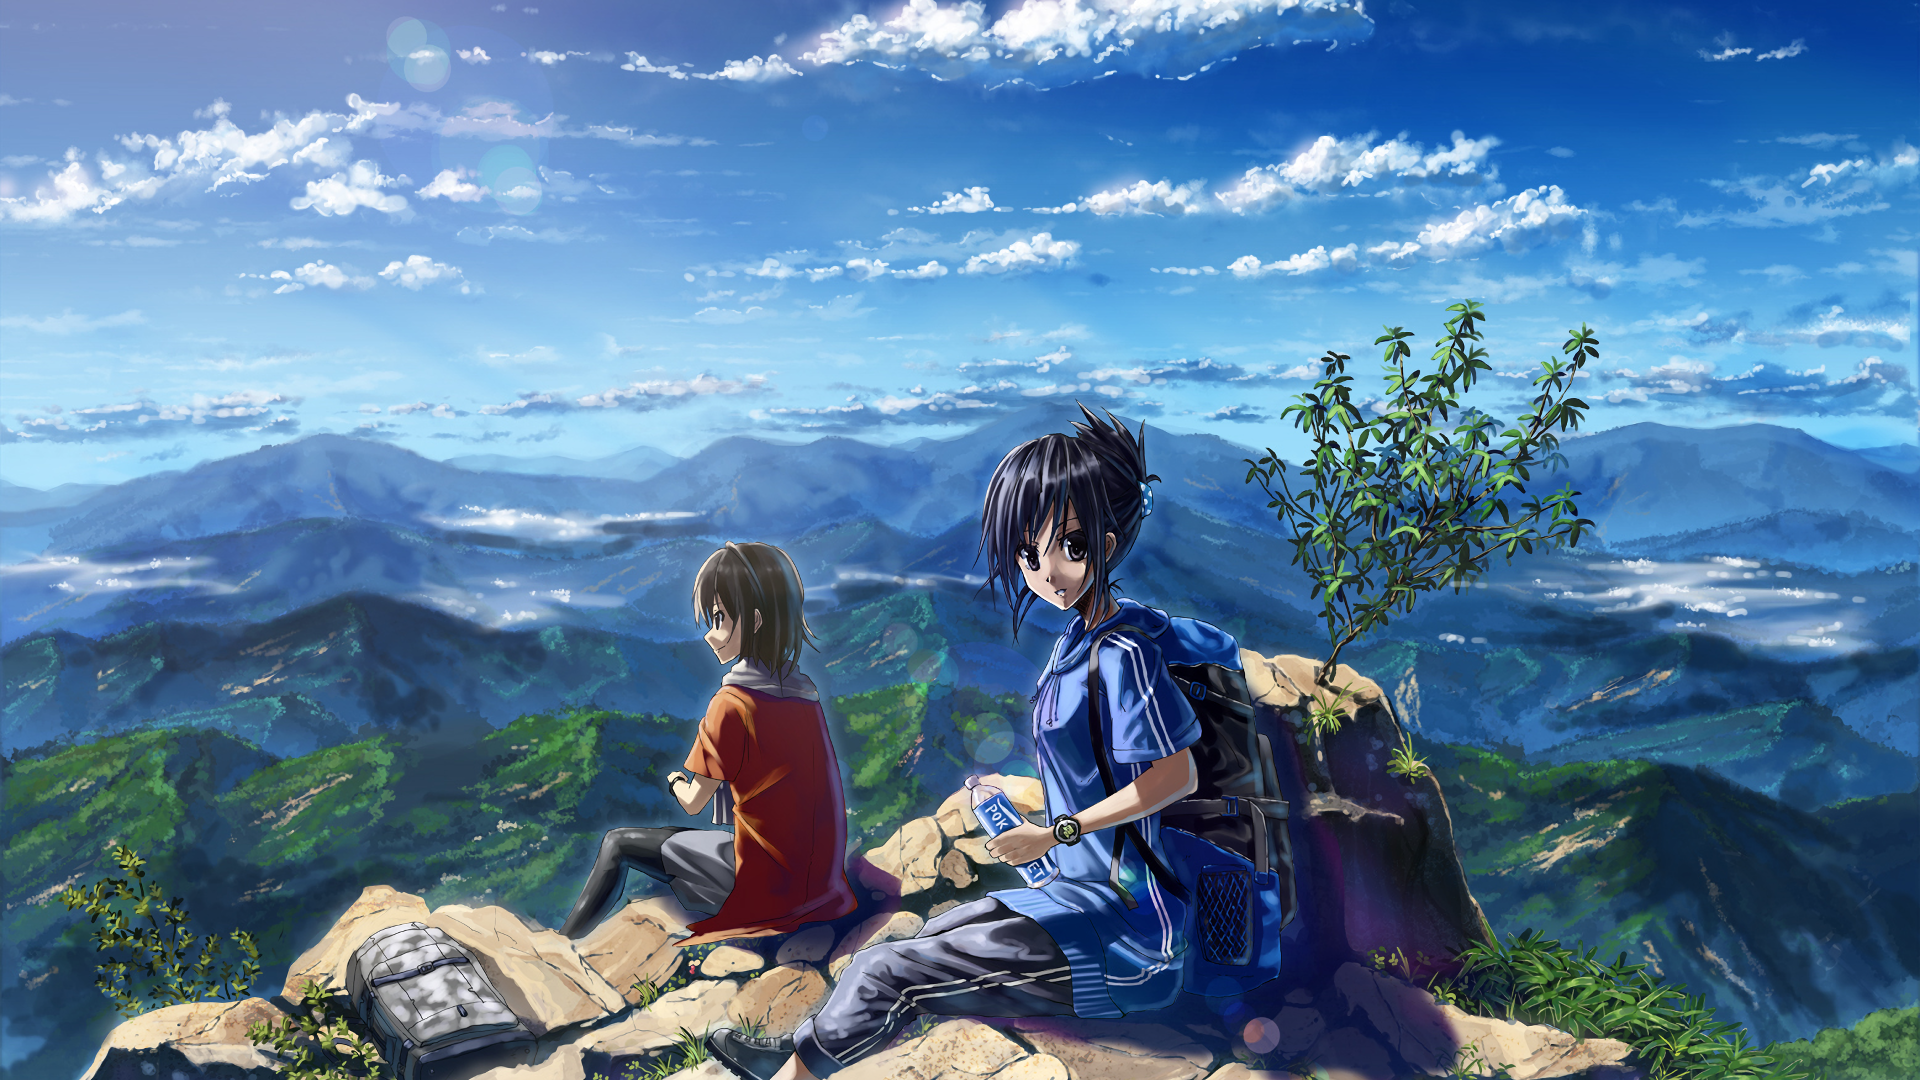 Download 1920x1080 Anime Landscape, Mountains, Clouds, Sky, Girl, Hiking Wallpaper for Widescreen